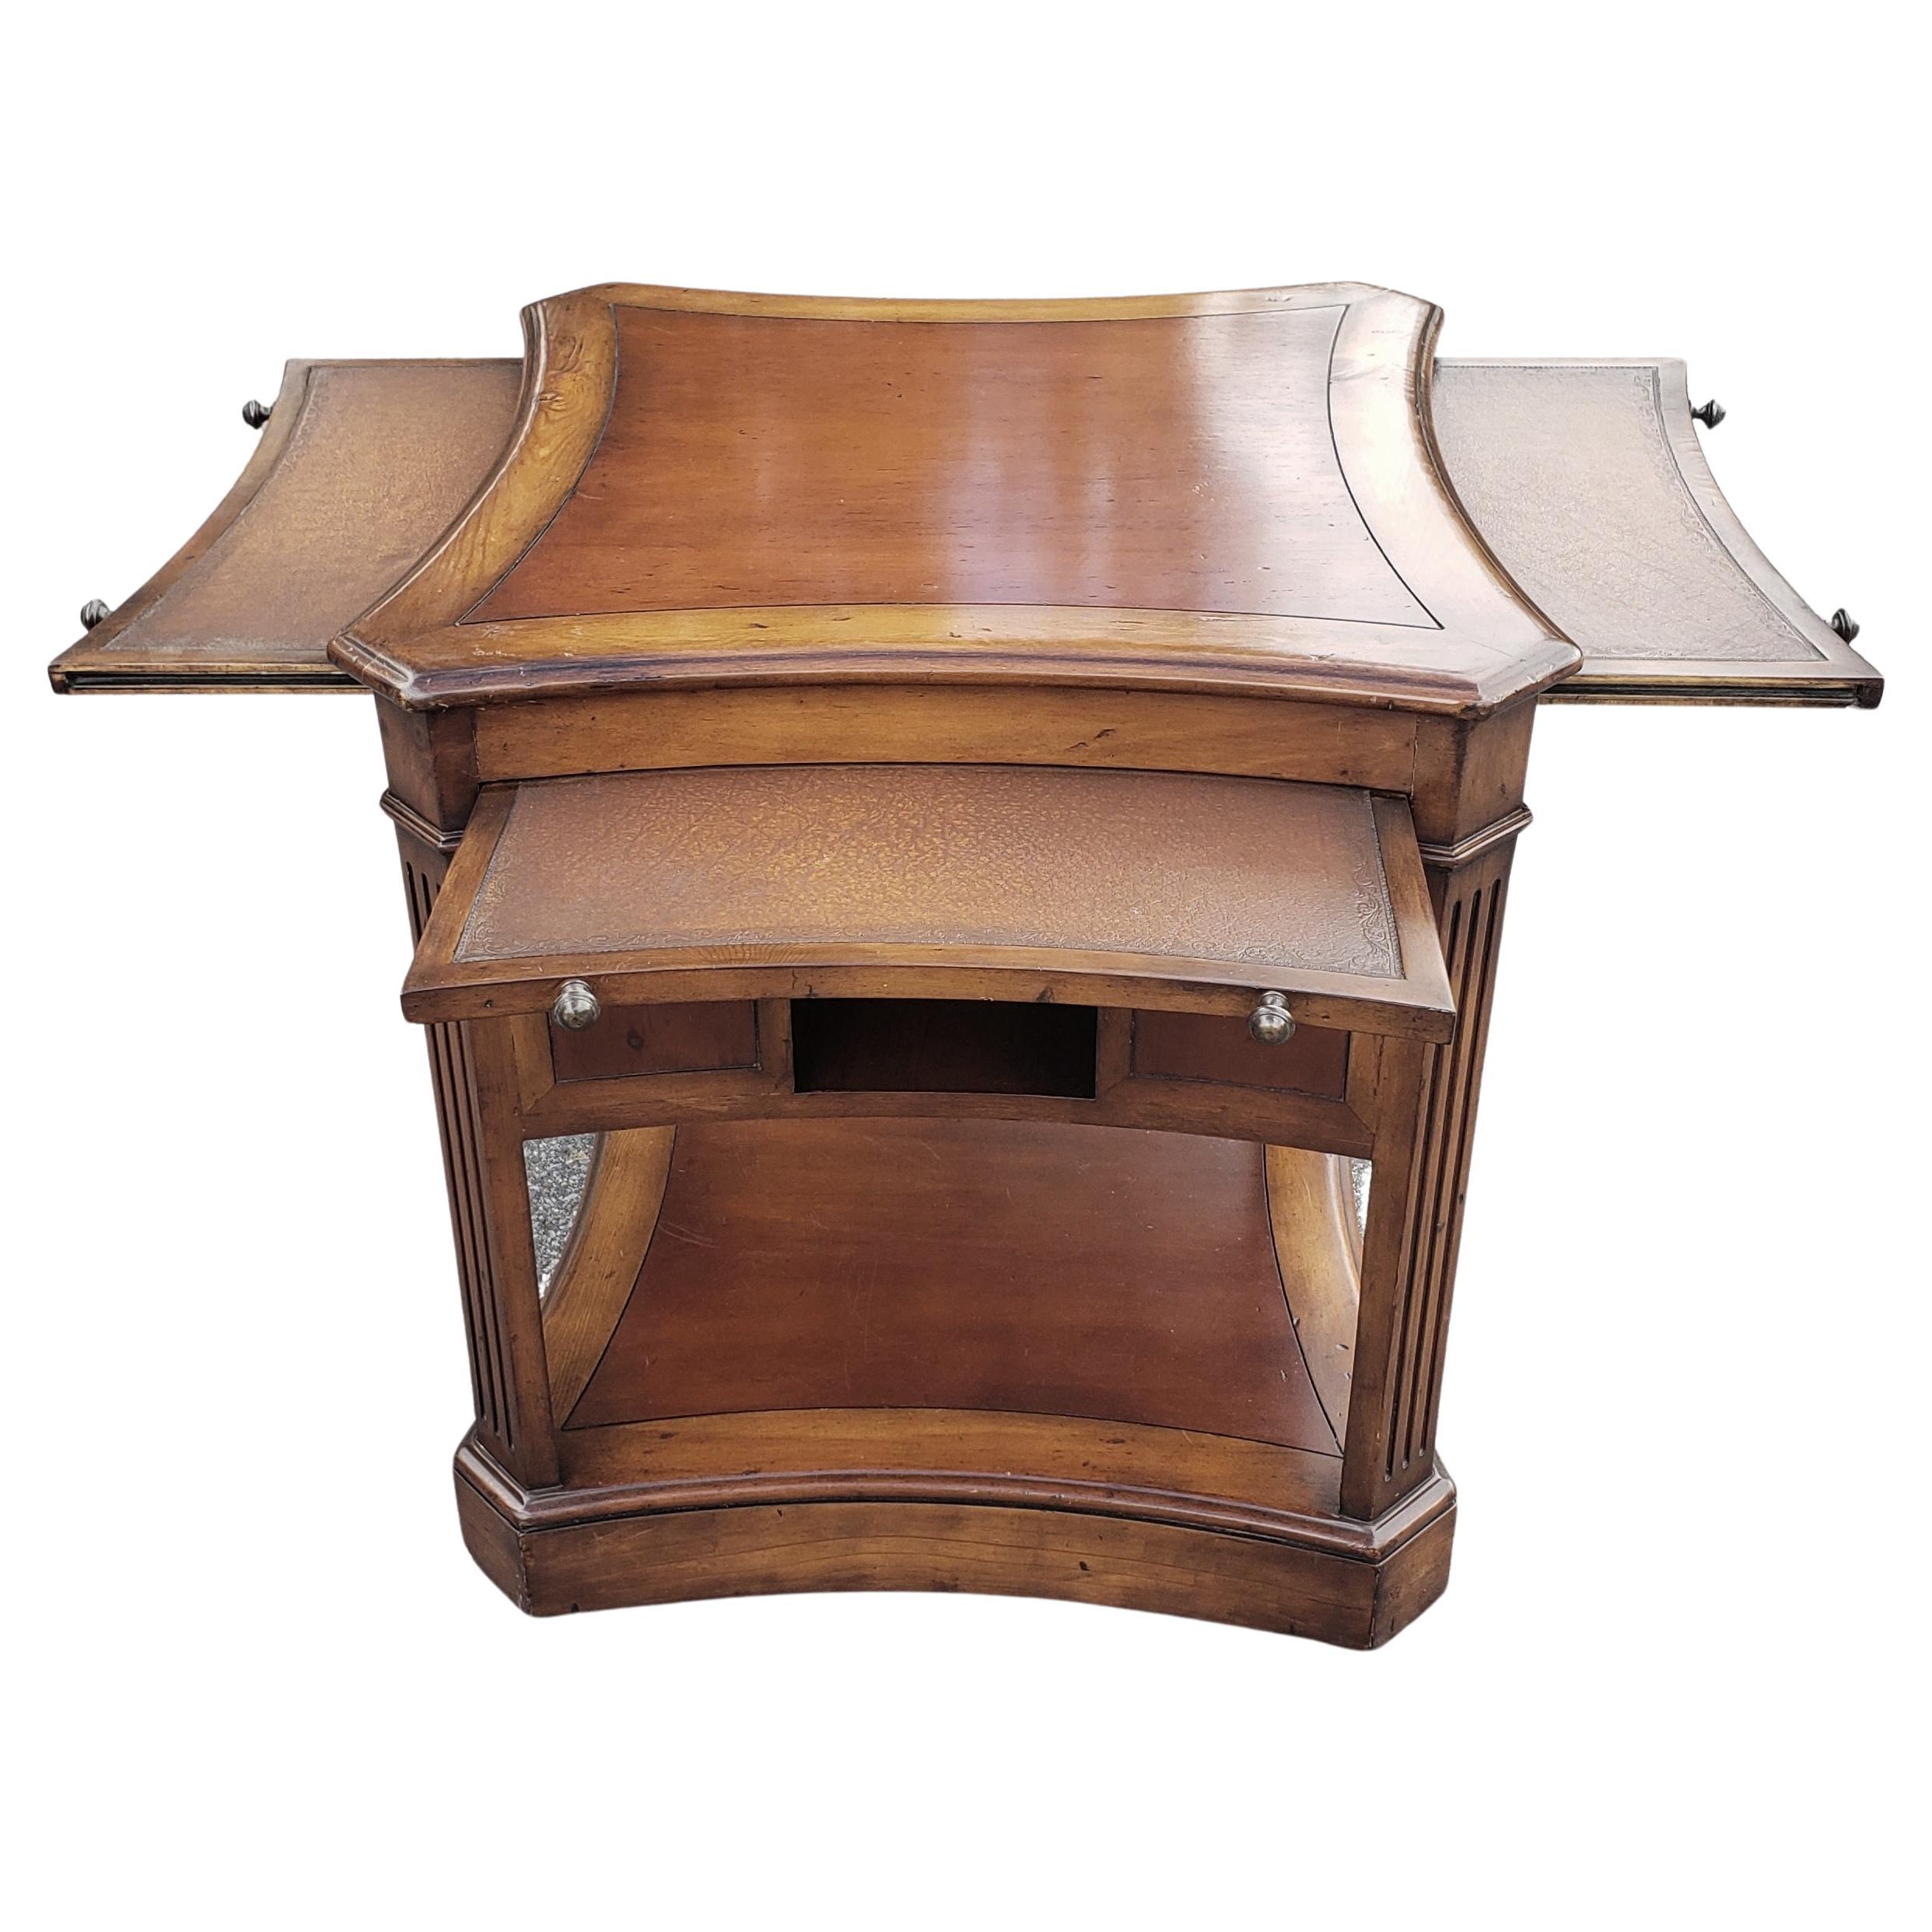 Stained Theodore Alexander Crossbanded Mahogany Side Table W/ Tooled Leather P/O Trays For Sale